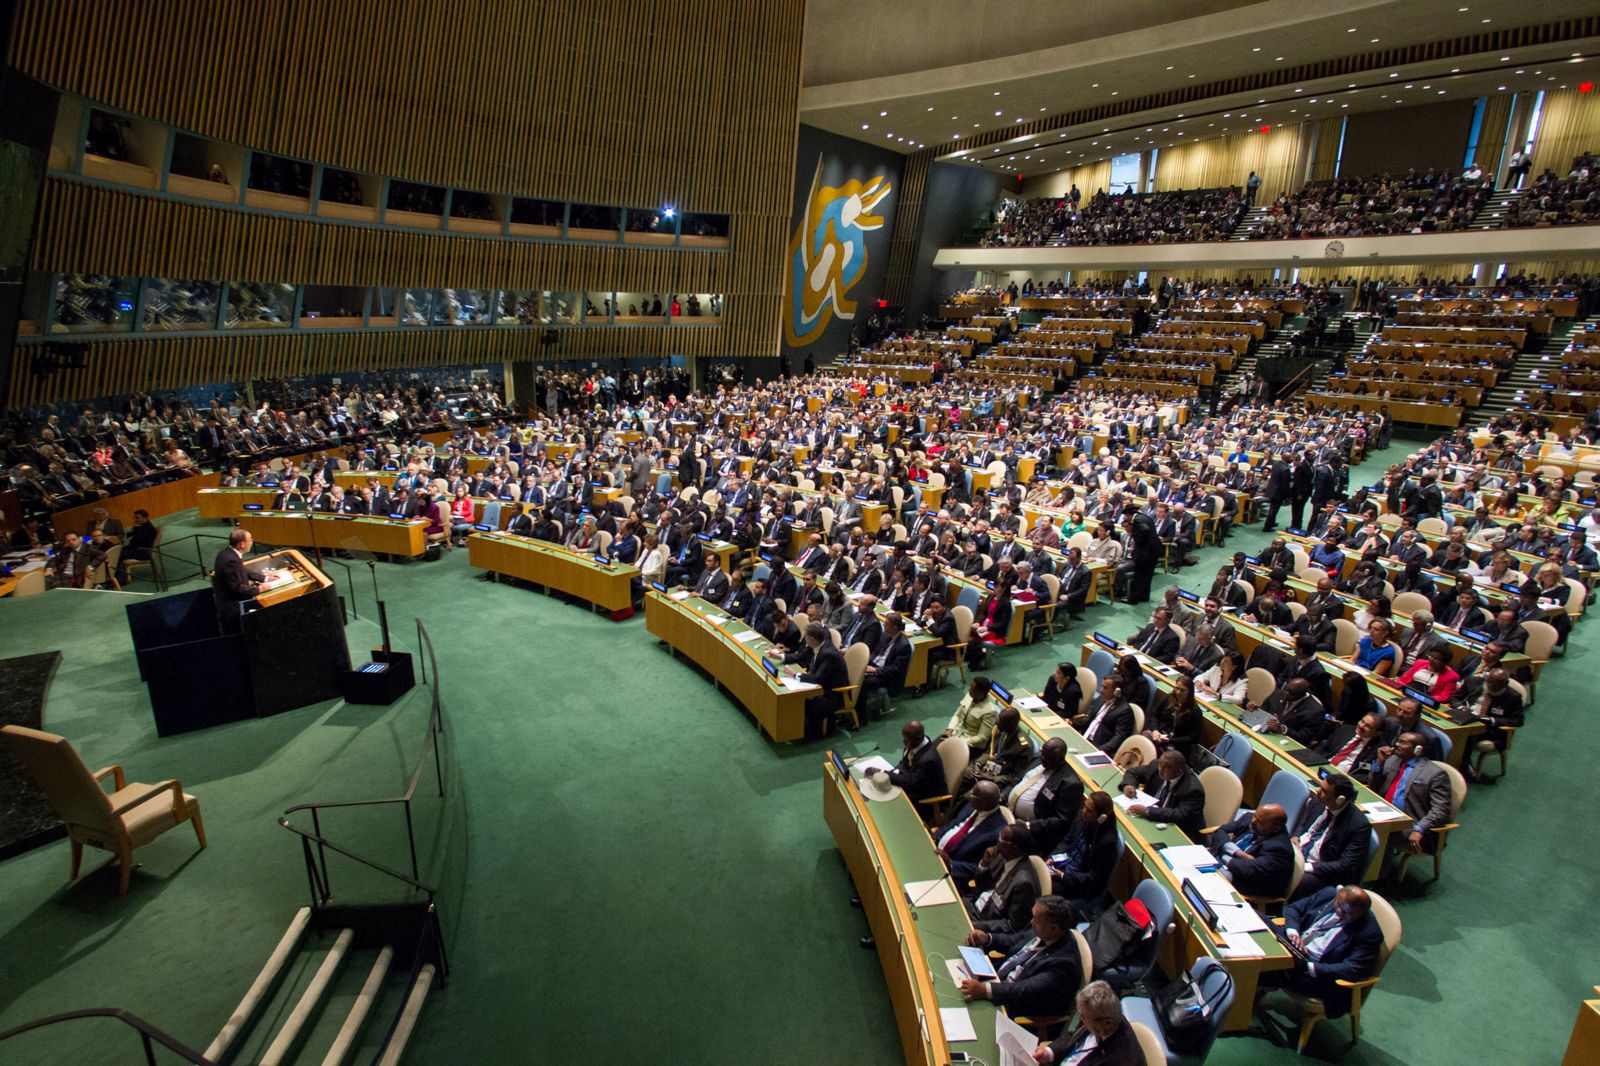 Elections without choice: “clean slates” in the Human Rights Council